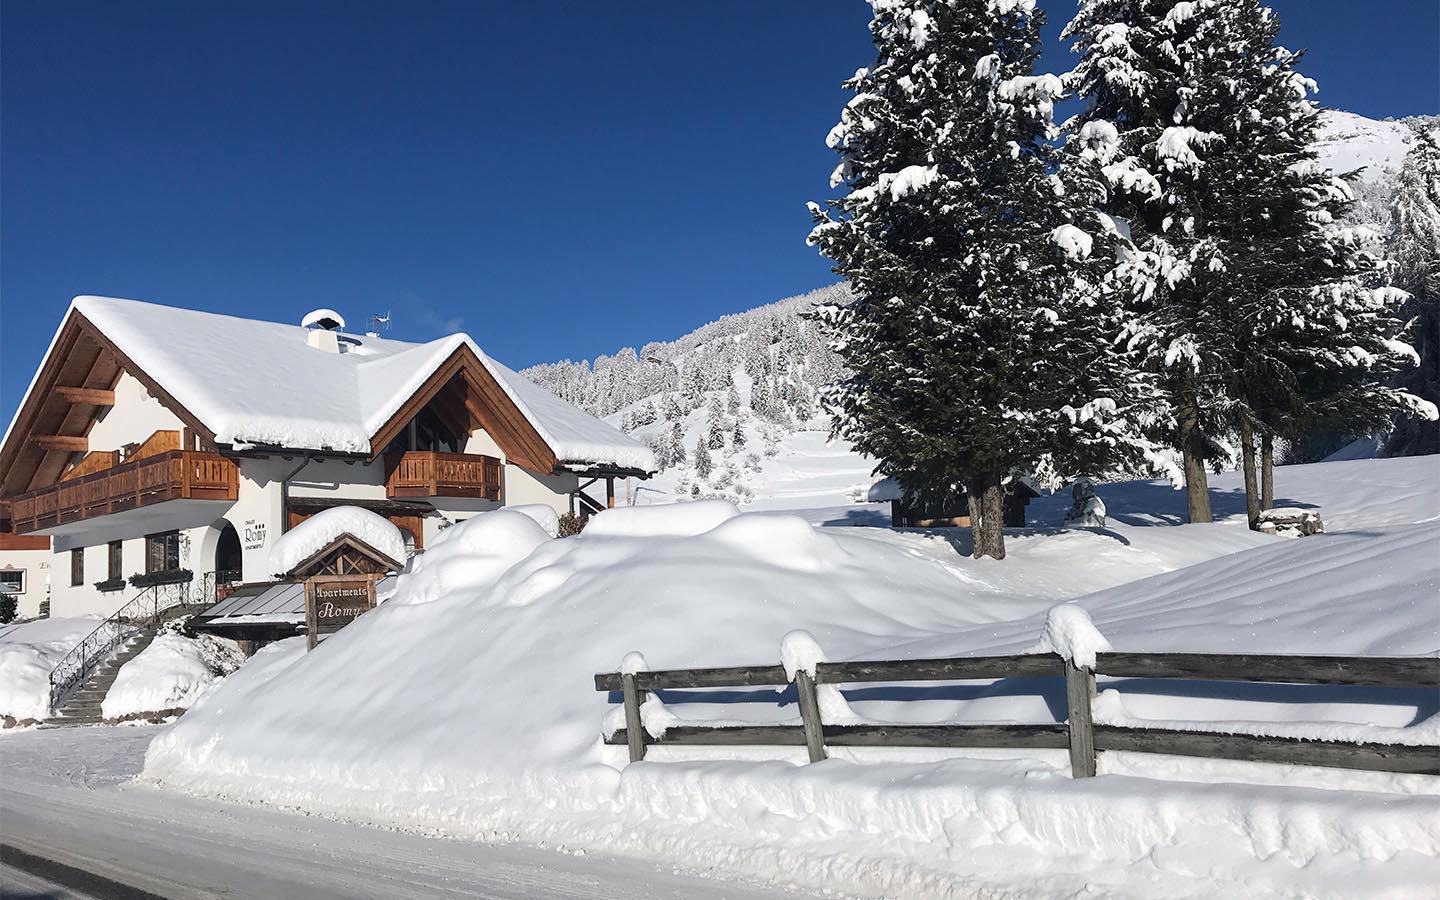 Chalet and apartments Romy in winter - Dolomites Italy